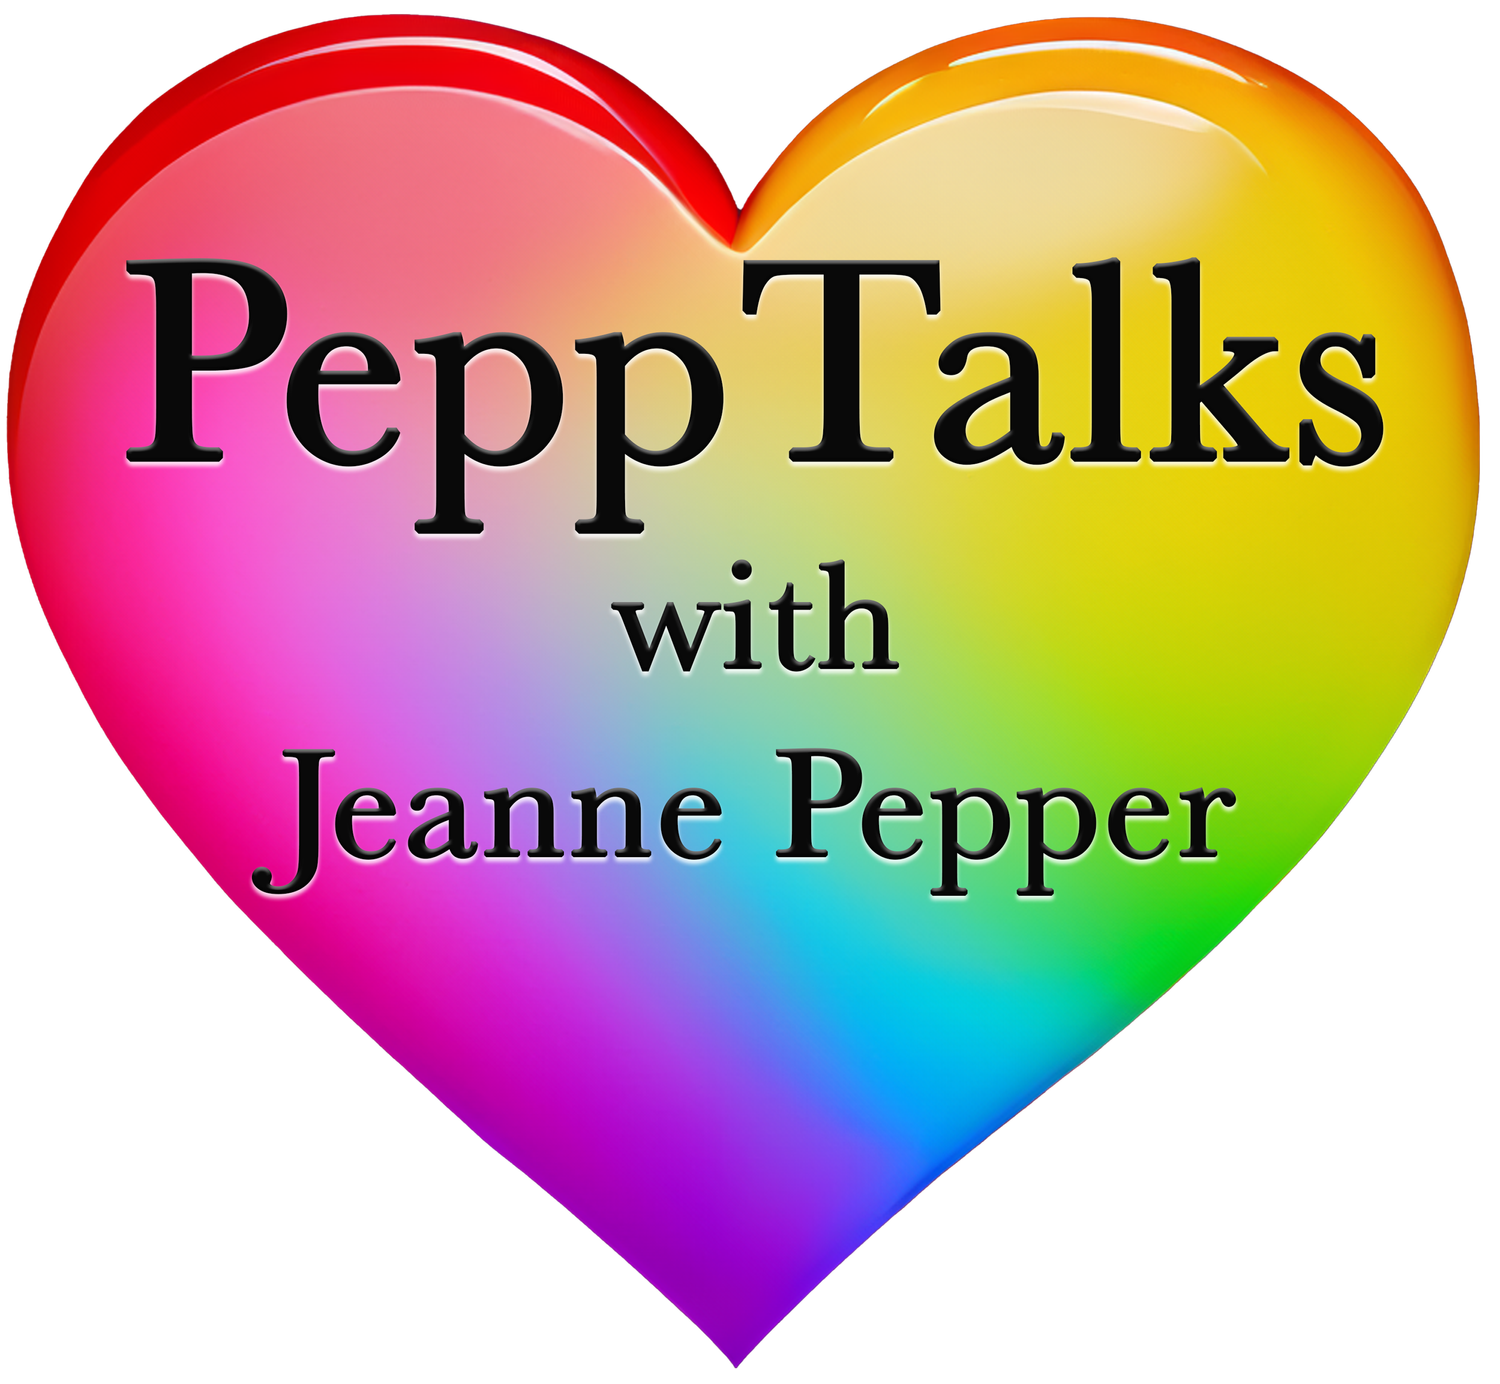 PeppTalks with Jeanne Pepper